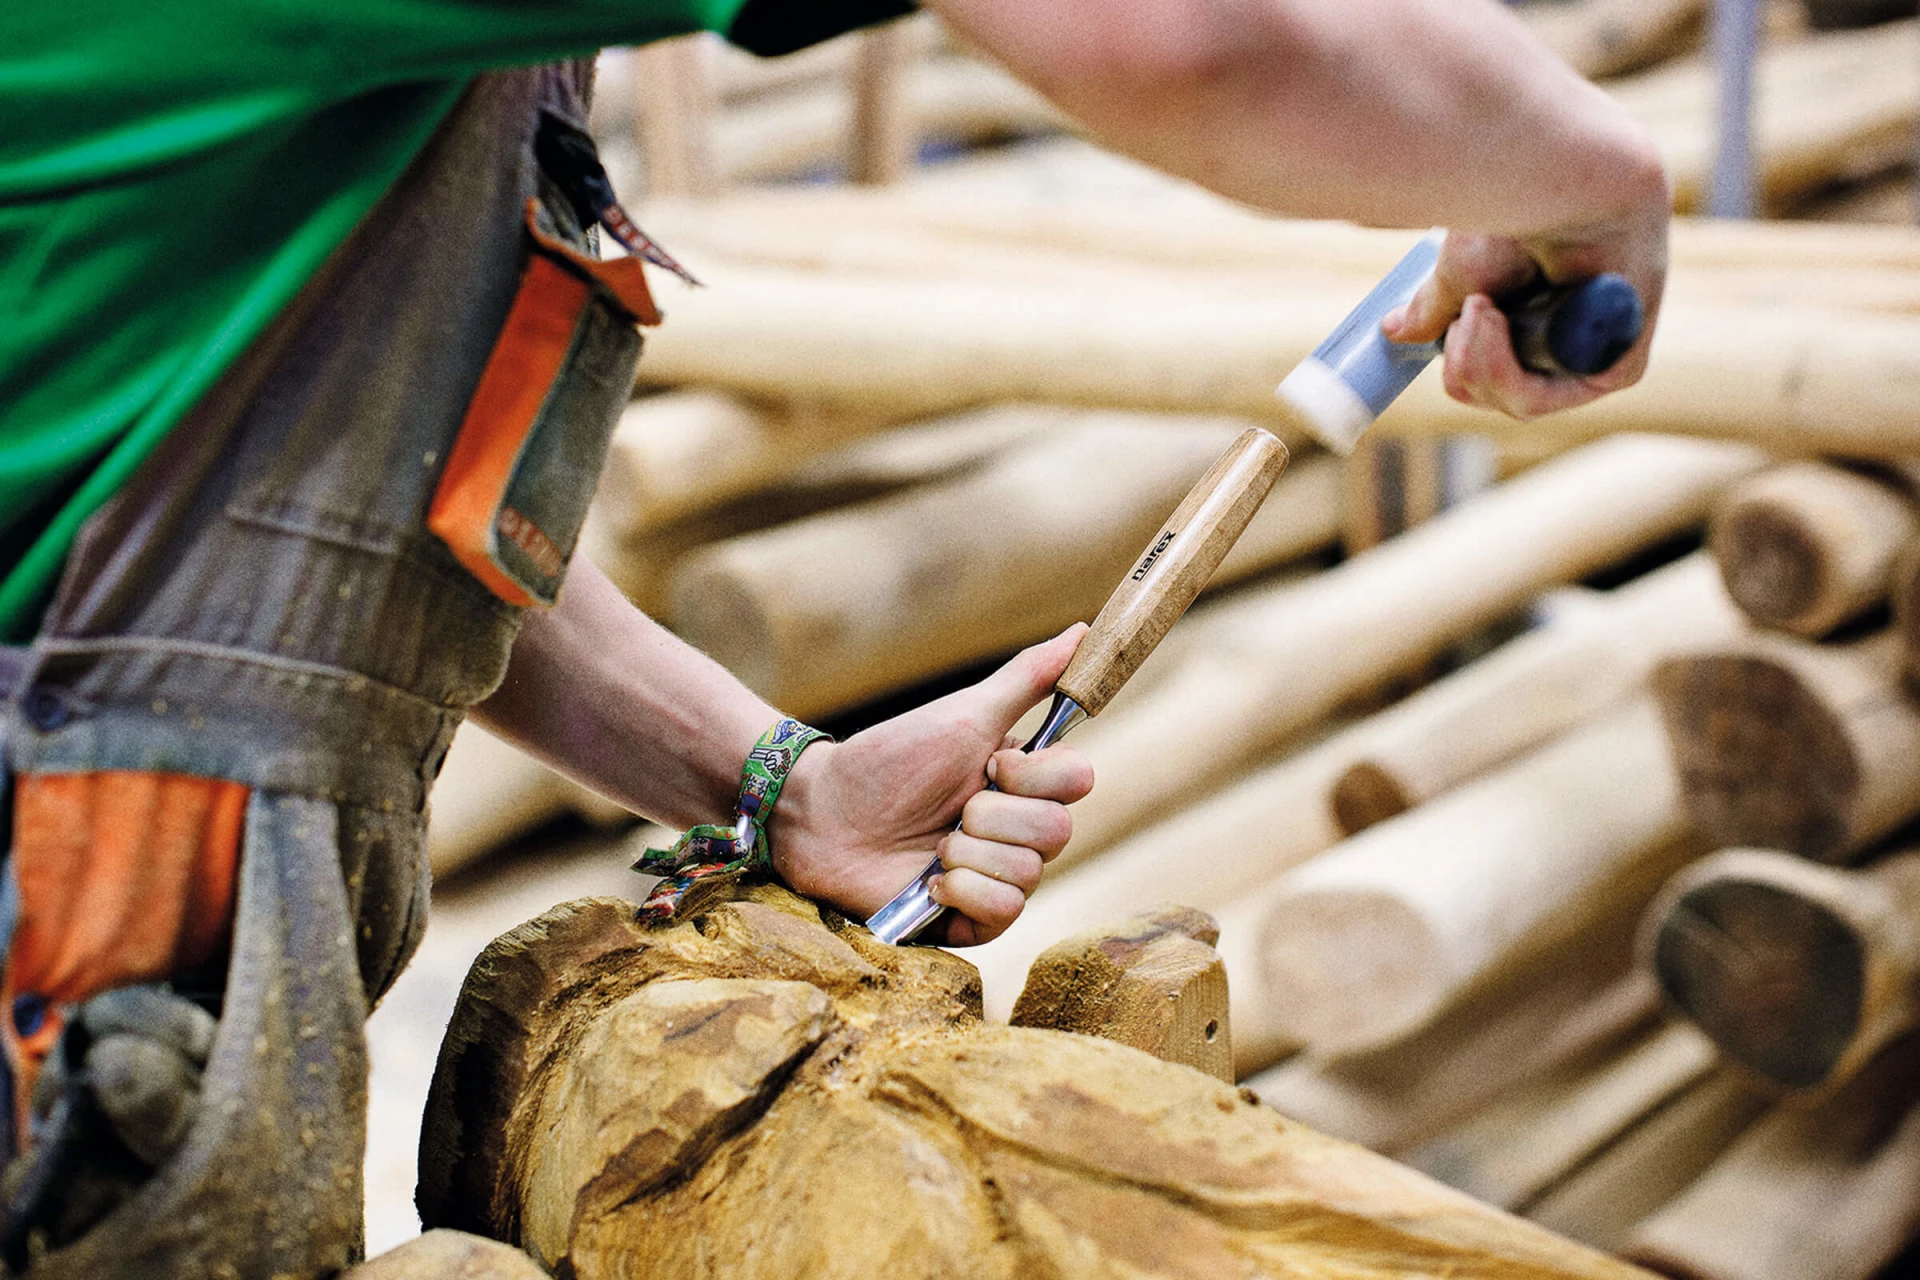 A man using a tool on a log of robinia wood at the KOMPAN factory in Brno. If you're looking for a natural aesthetic as part of your playground equipment plan, robinia wood is a great choice.